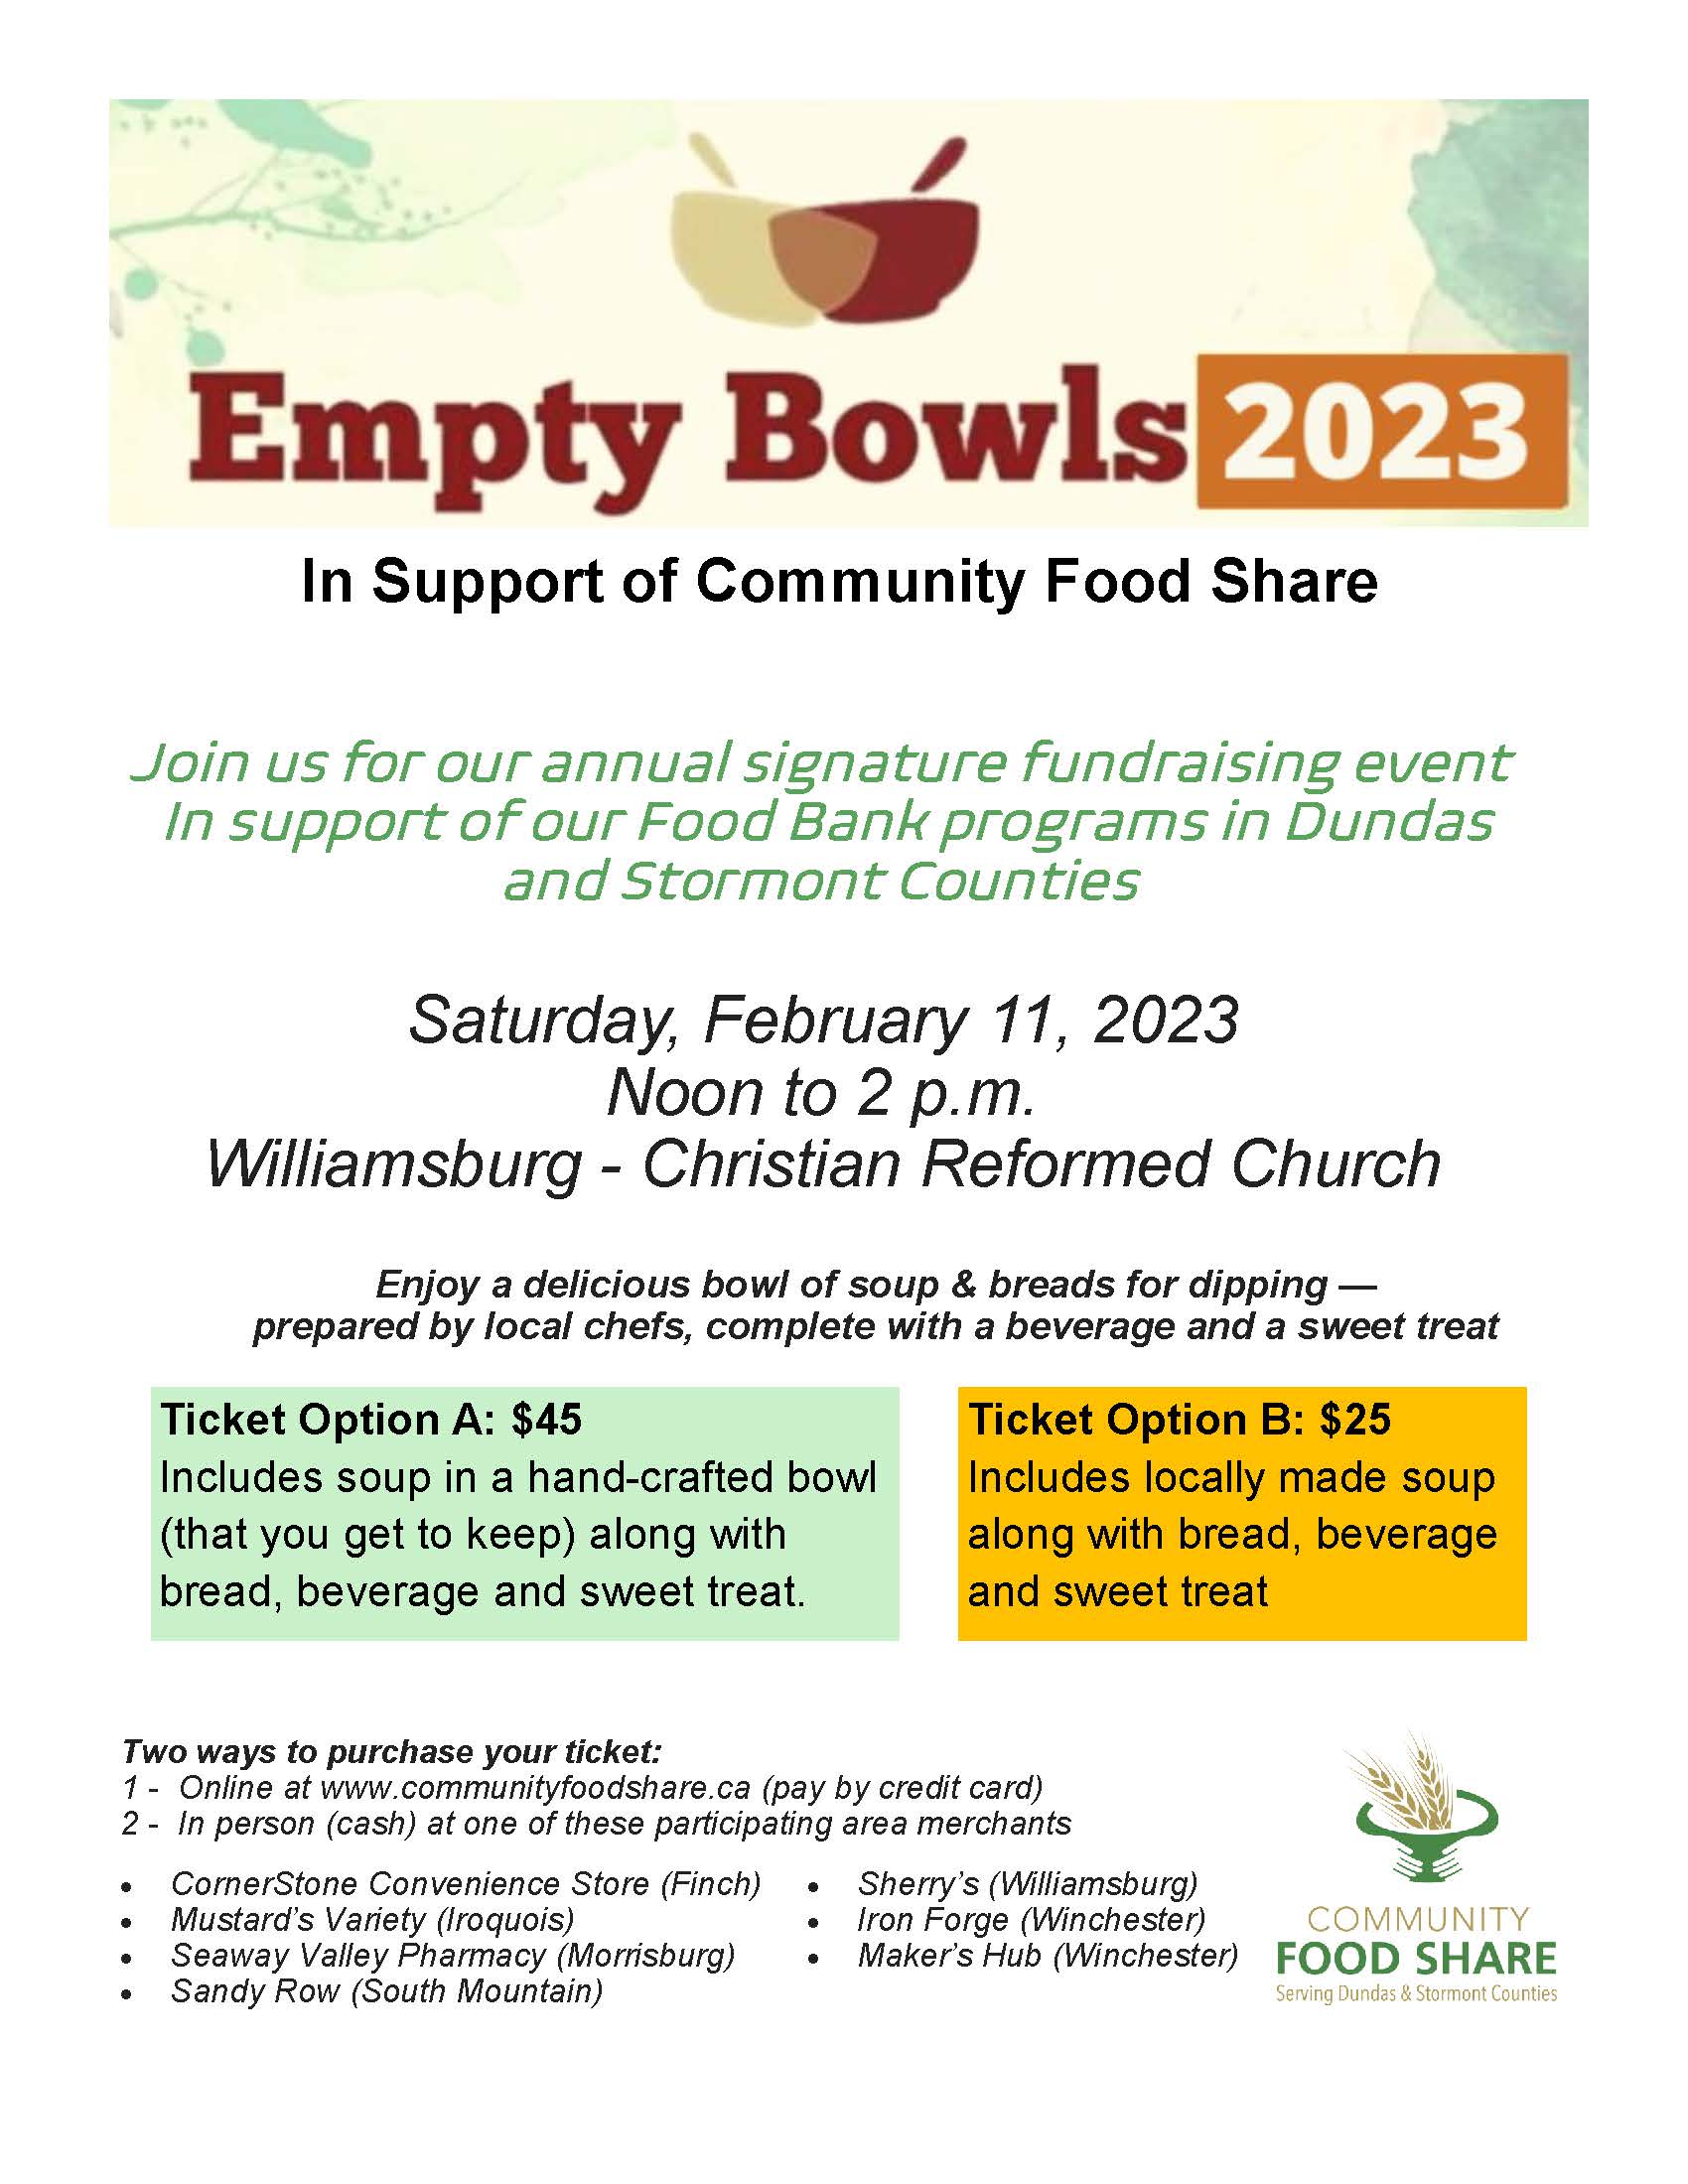 Empty Bowls Fundraising Event poster